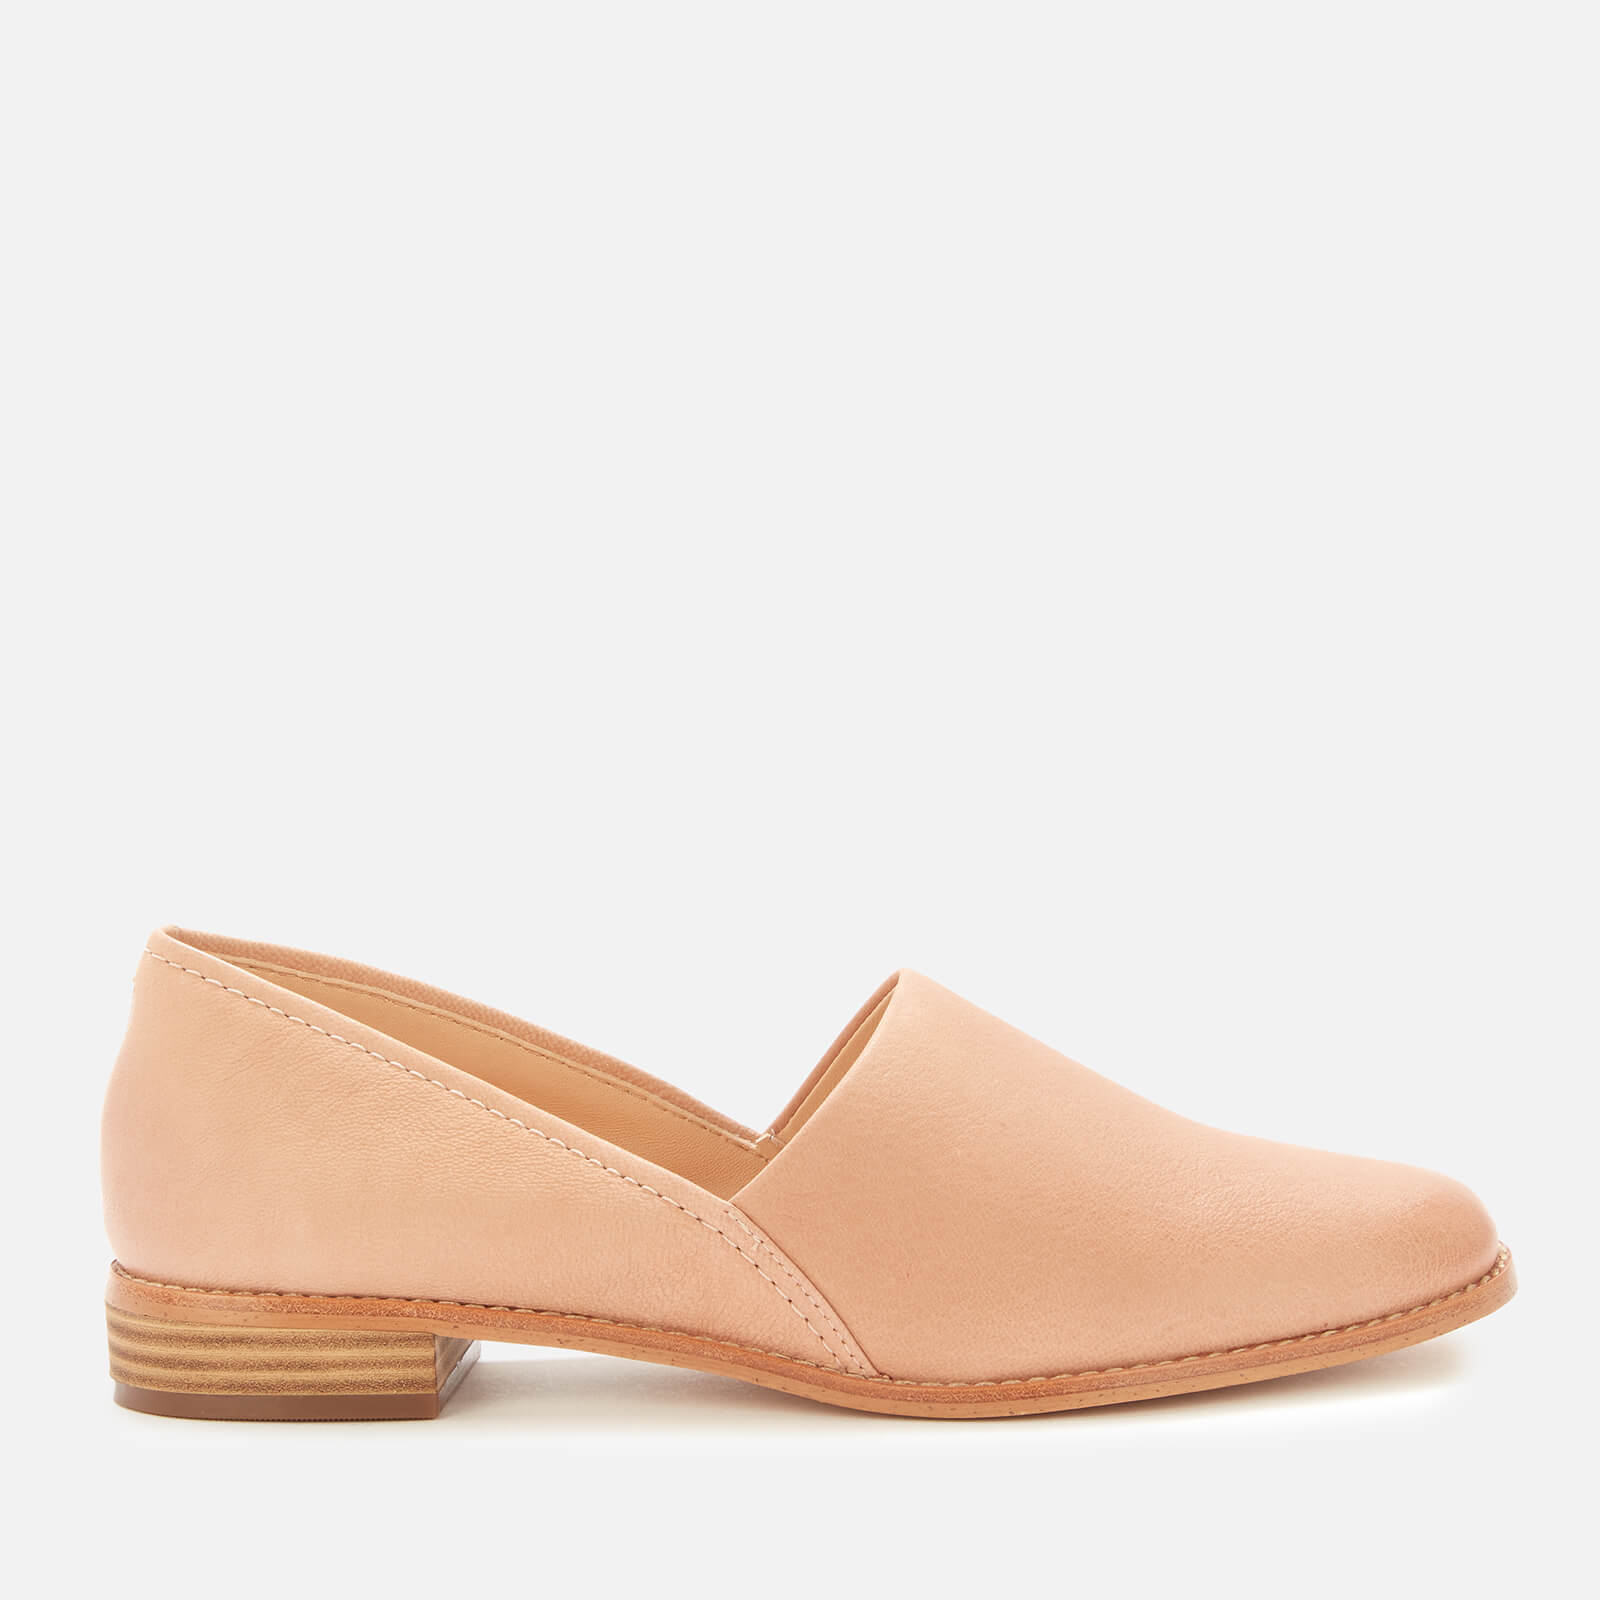 Clarks Women's Pure Easy Leather Flats - Light Pink - UK 3